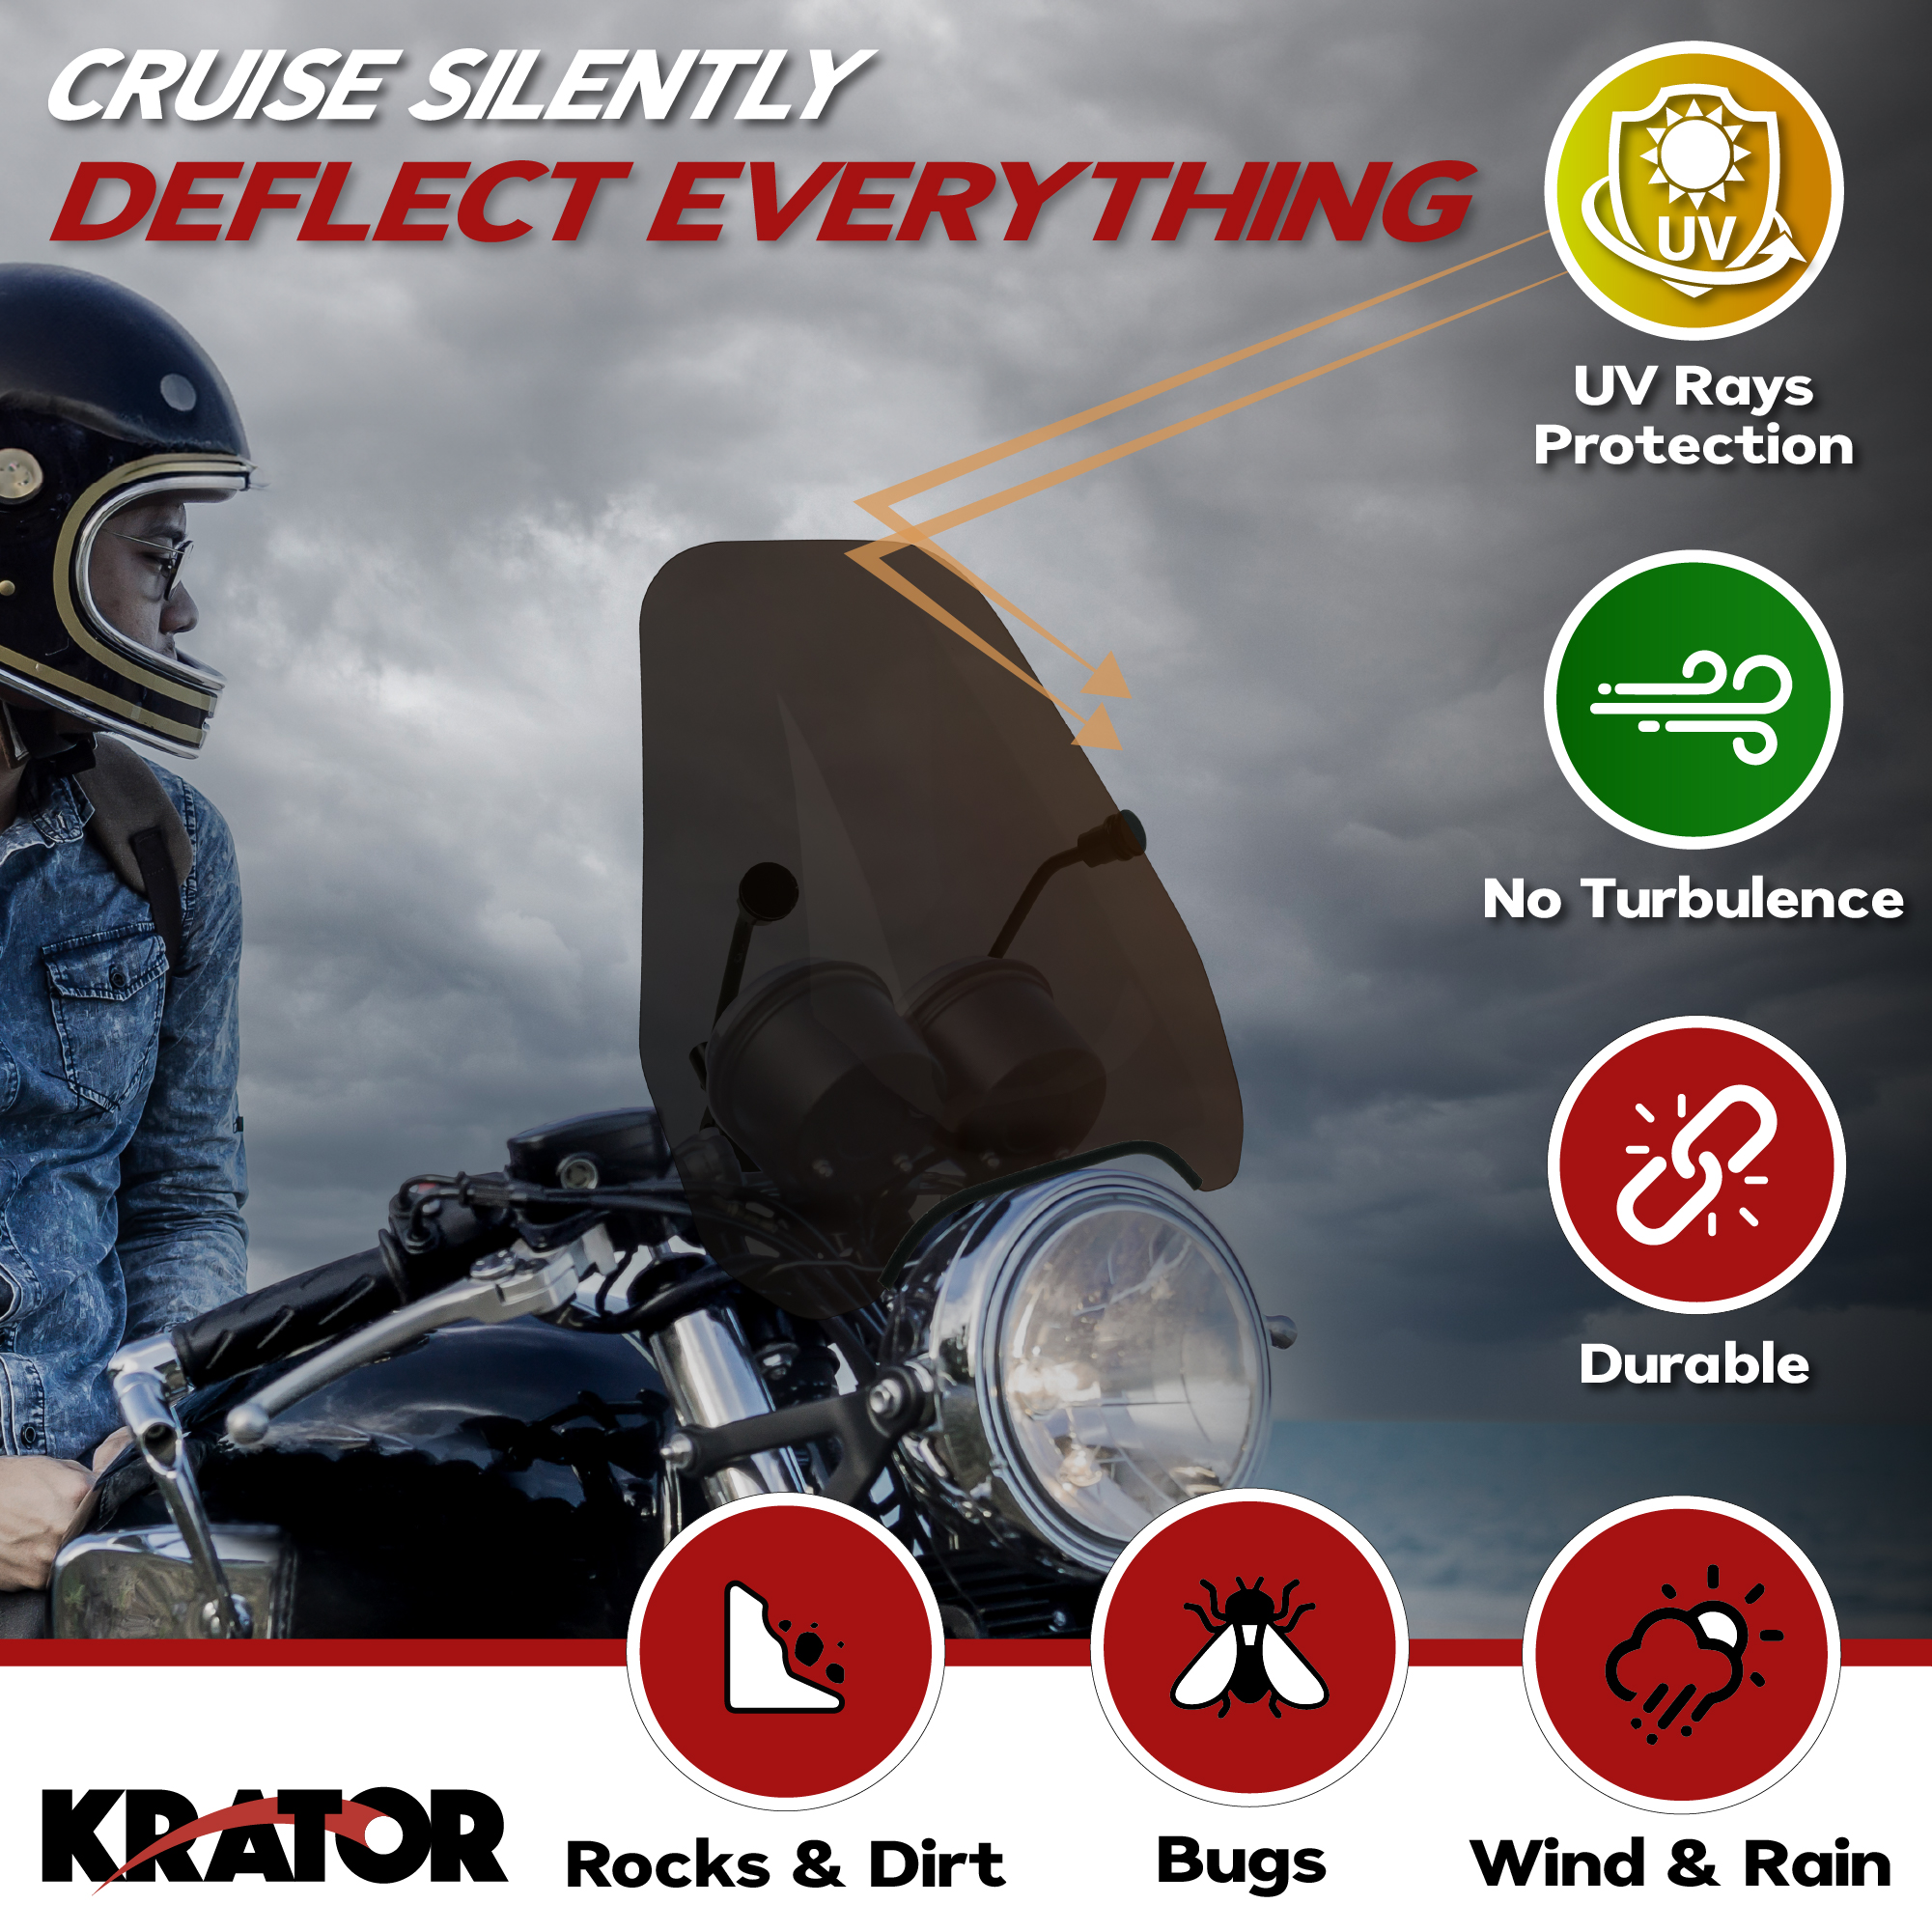 Krator 15" Smoke Tinted Windscreen Windshield Compatible with Harley-Davidson Sportster XL1200/C/L (1988-2010) Fits 7/8" or 1"